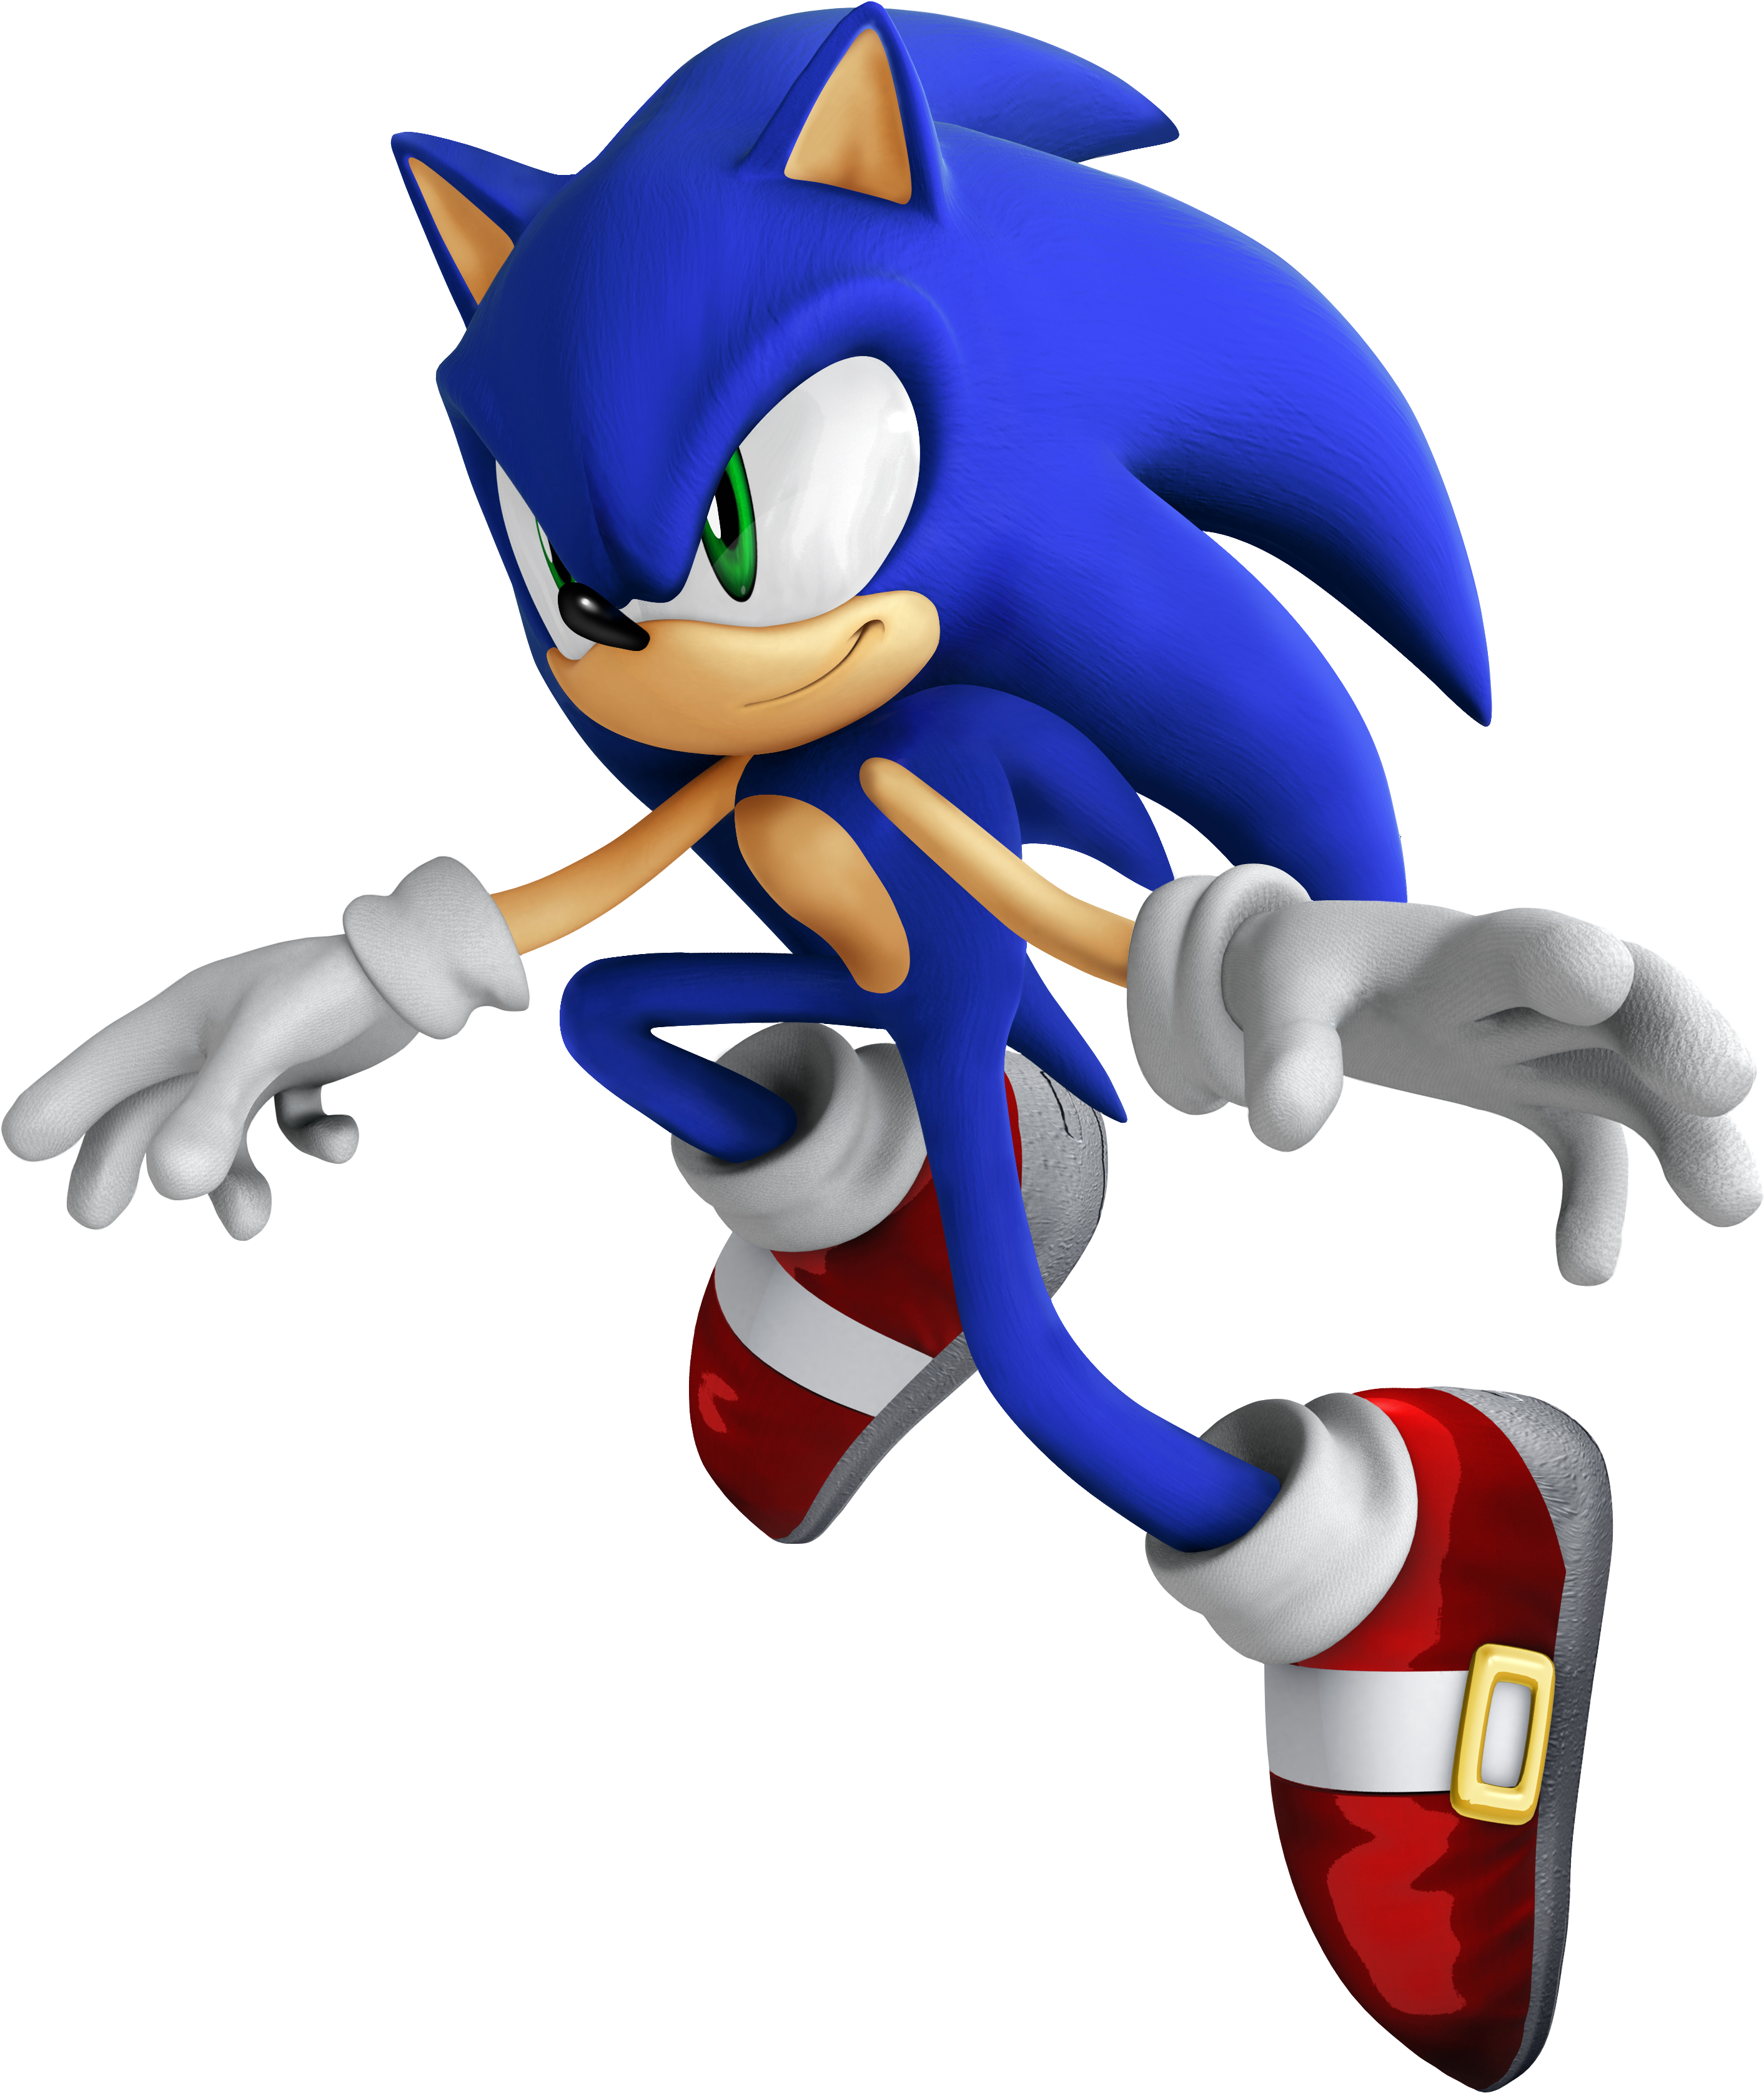 Download Sonic The Hedgehog (2006) wallpapers for mobile phone